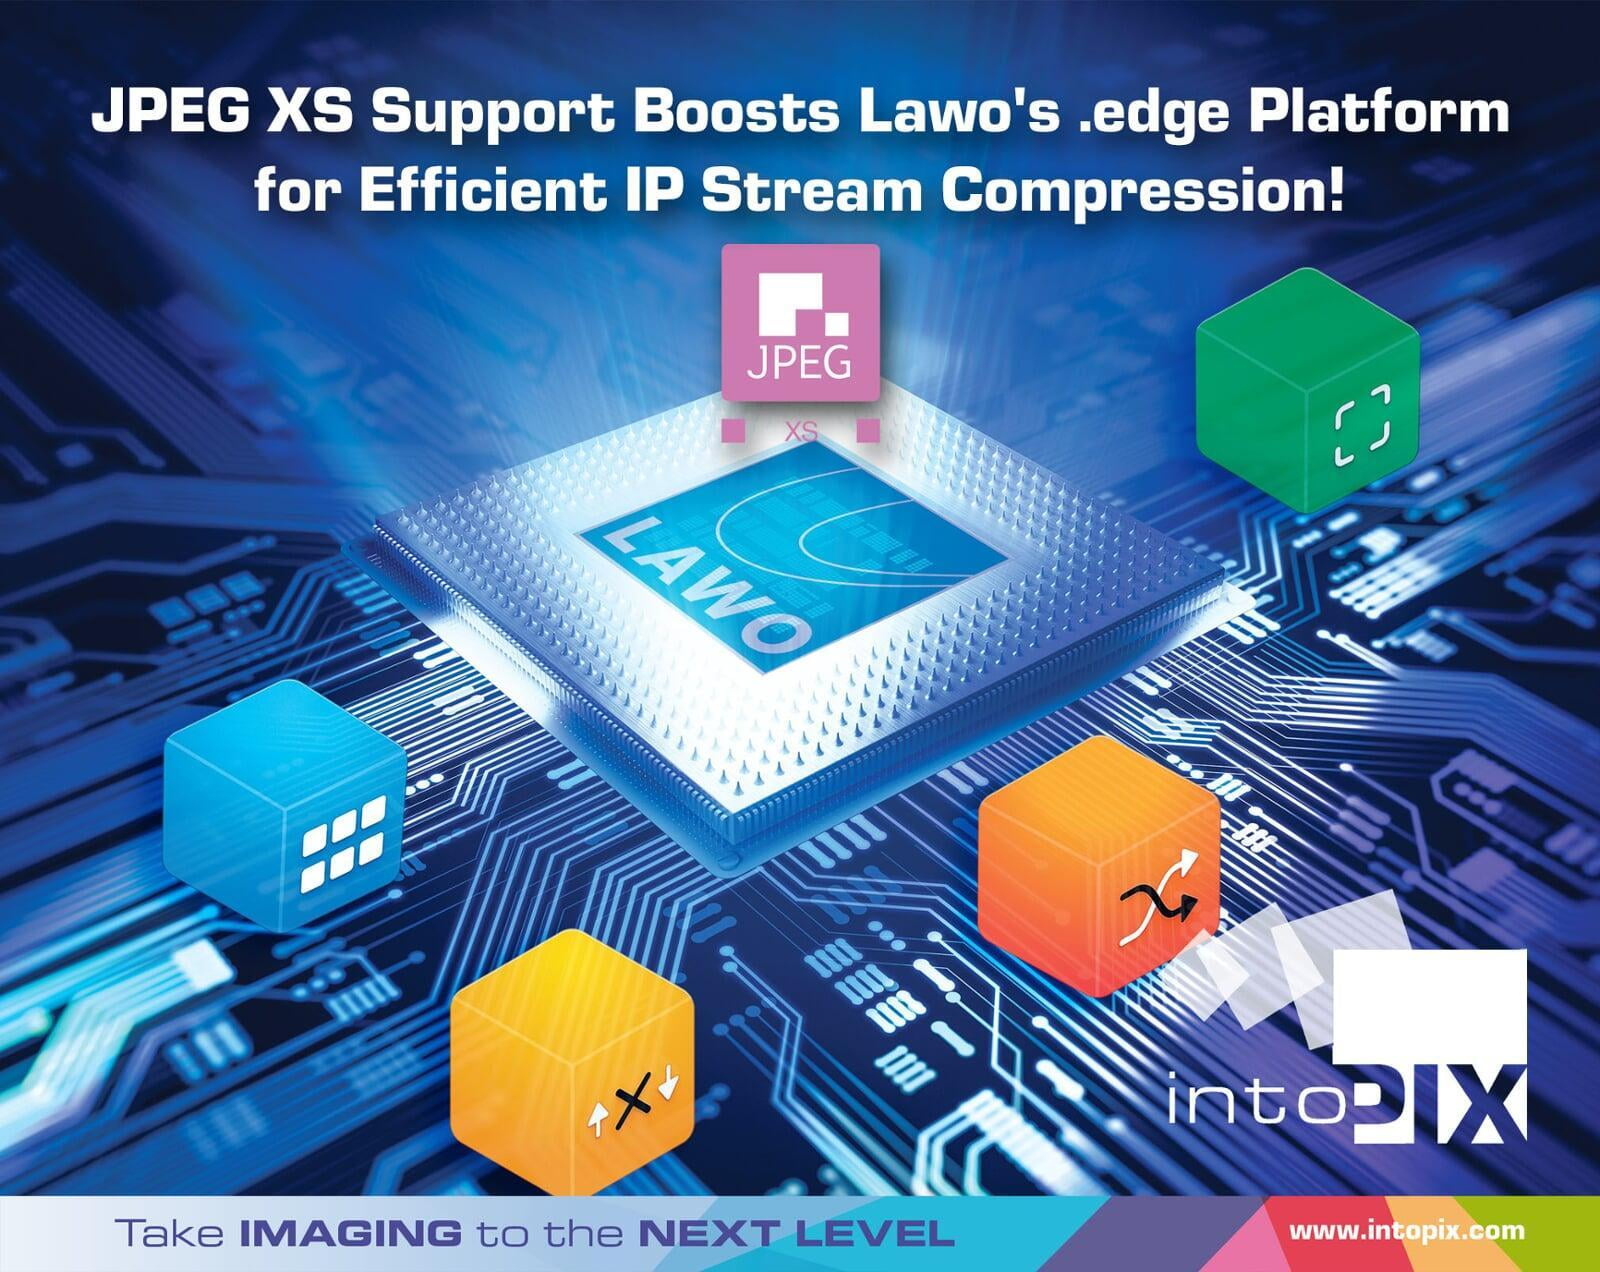 Lawo and intoPIX Partner to Deliver Edge-Compute JPEG XS Support at IBC 2023